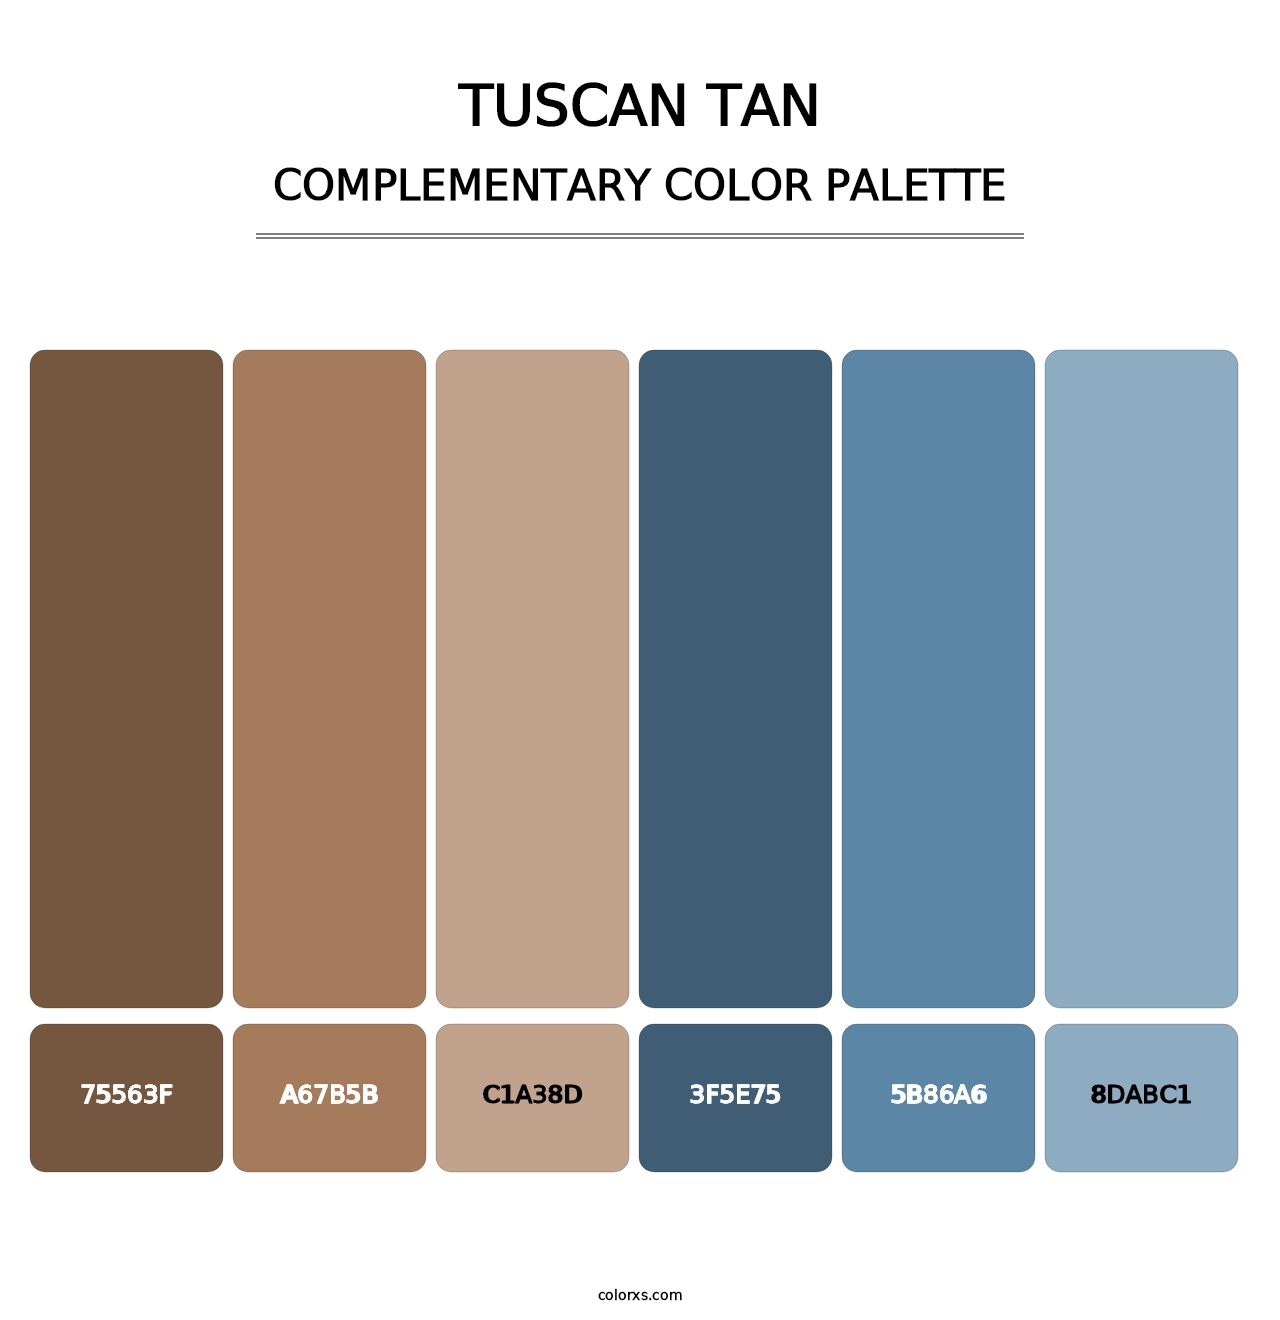 Tuscan Tan - Complementary Color Palette